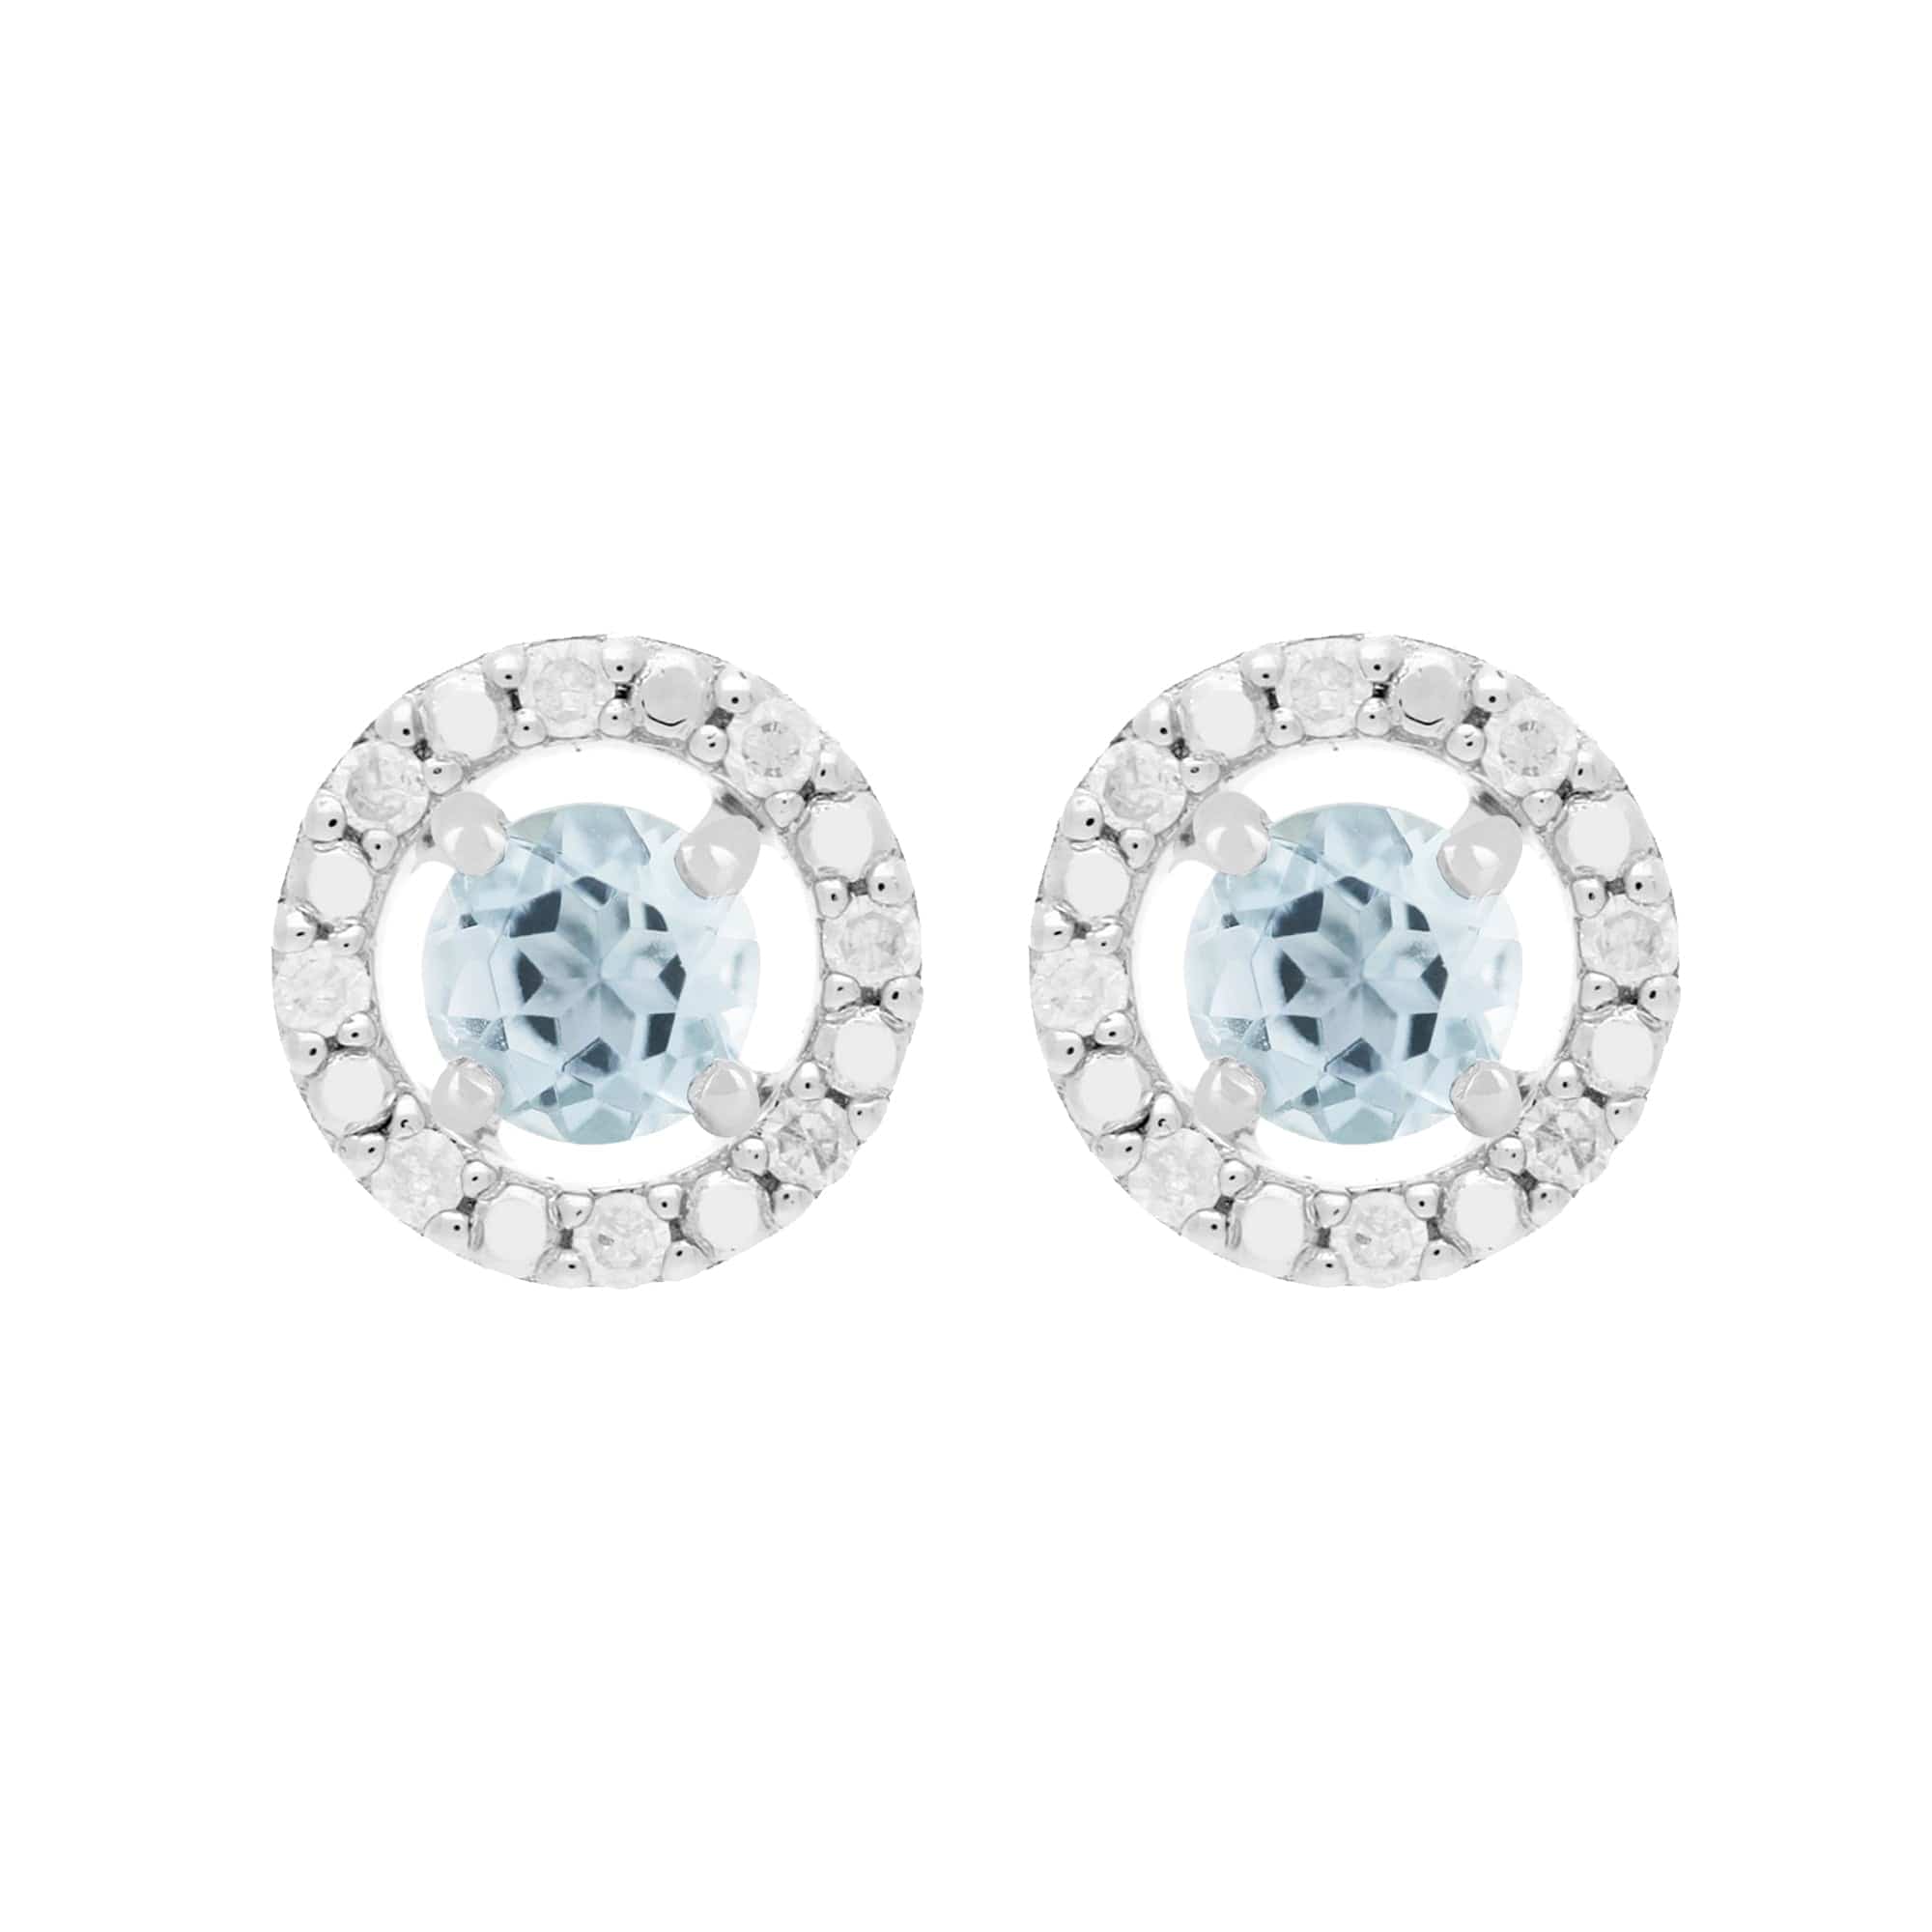 22526-162E0228019 Classic Round Aquamarine Stud Earrings with Detachable Diamond Round Ear Jacket in 9ct White Gold 1